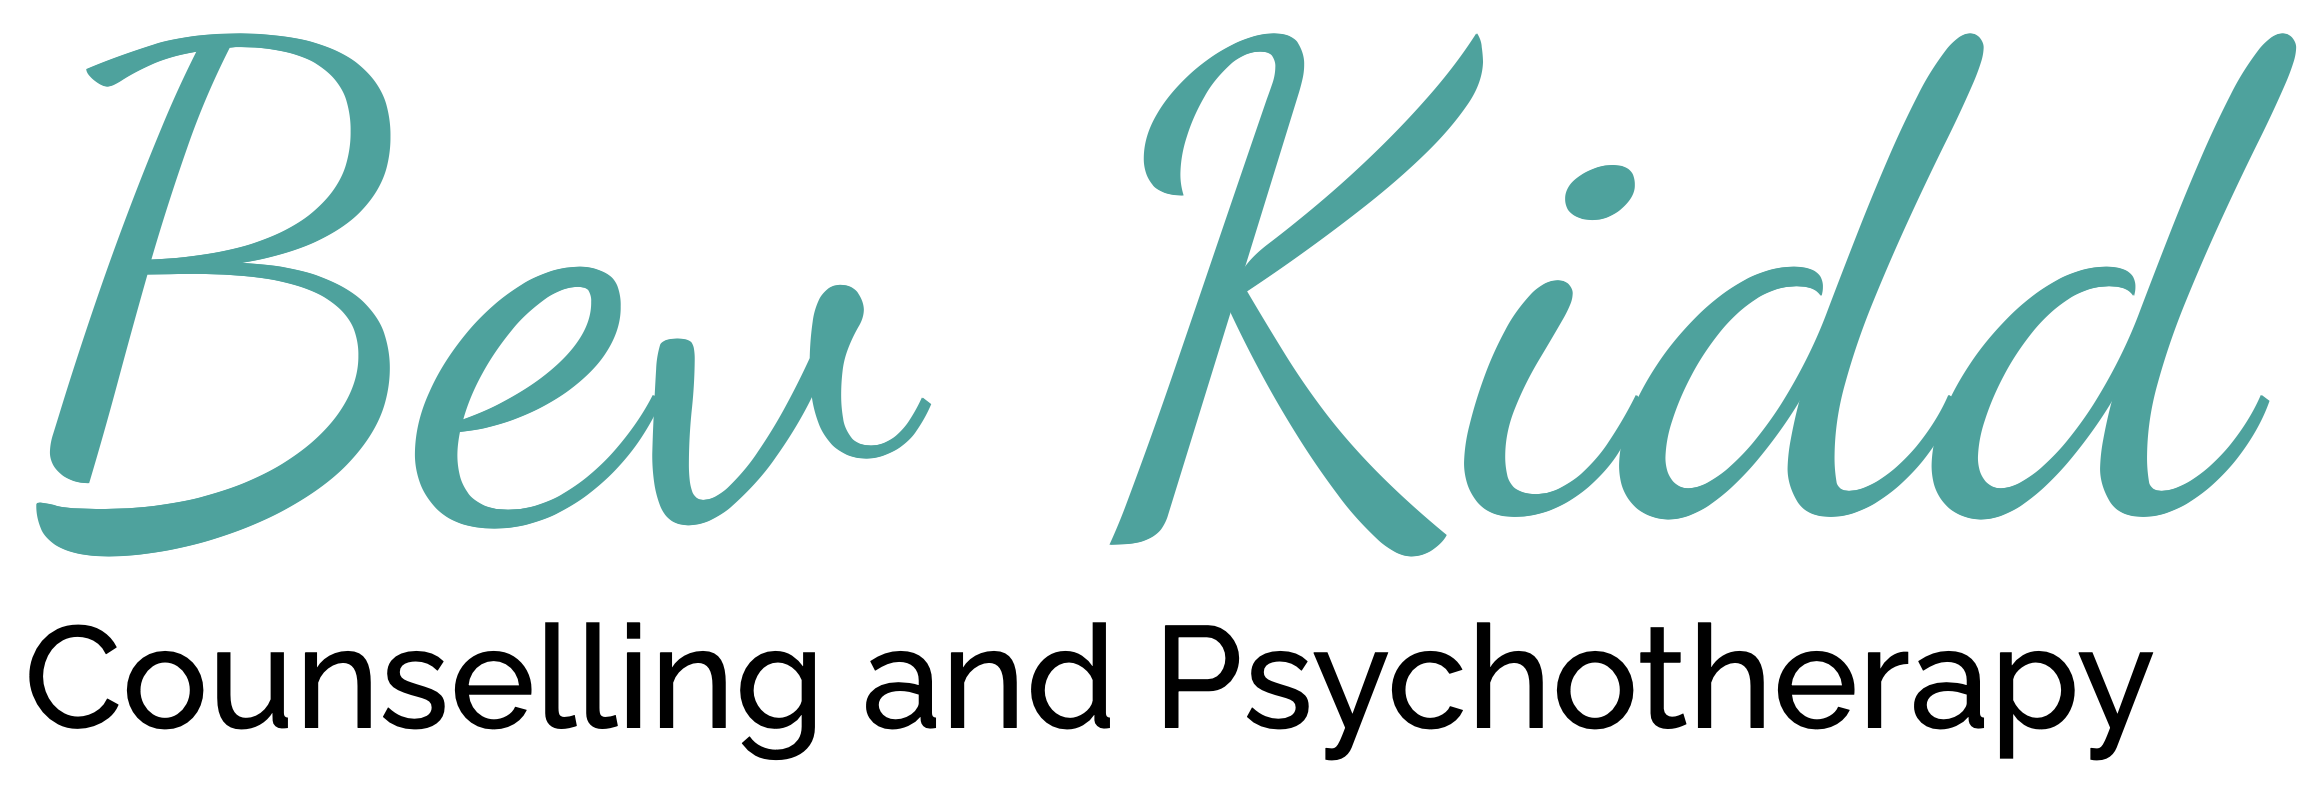 Bev Kidd Counselling and Psychotherapy